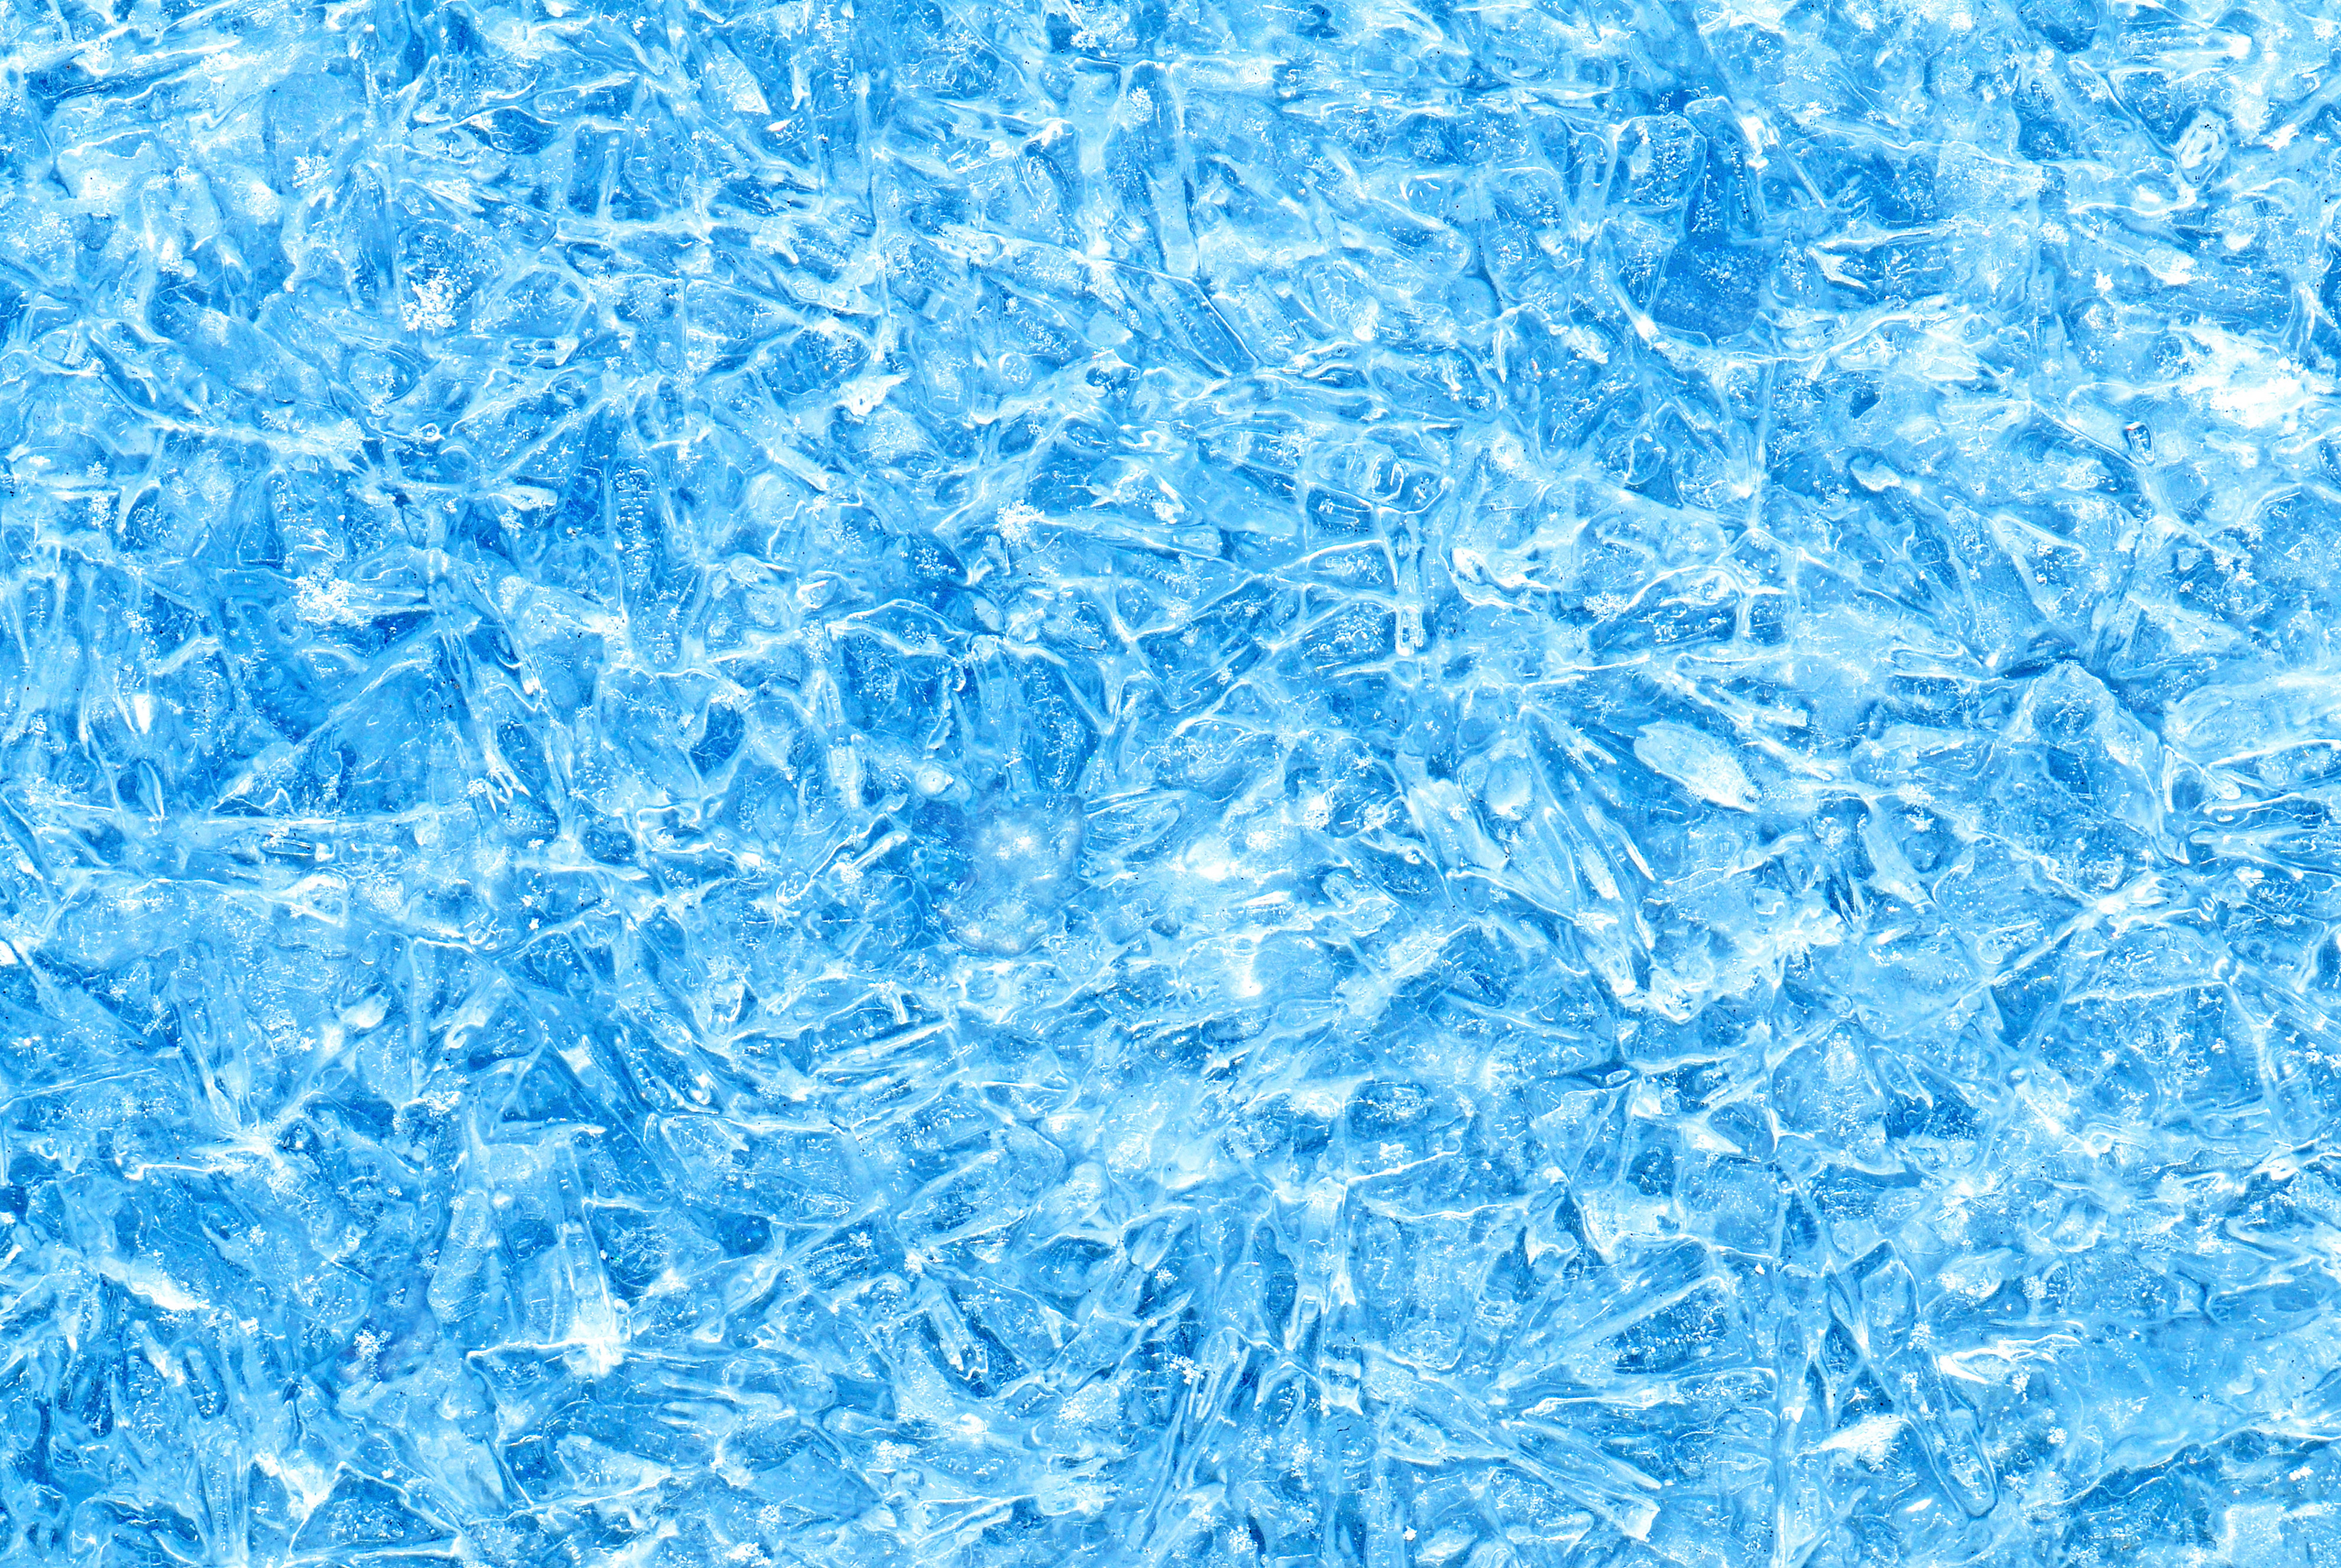 30 Free Ice Texture Backgrounds for Web Designers Tech Lovers l Web